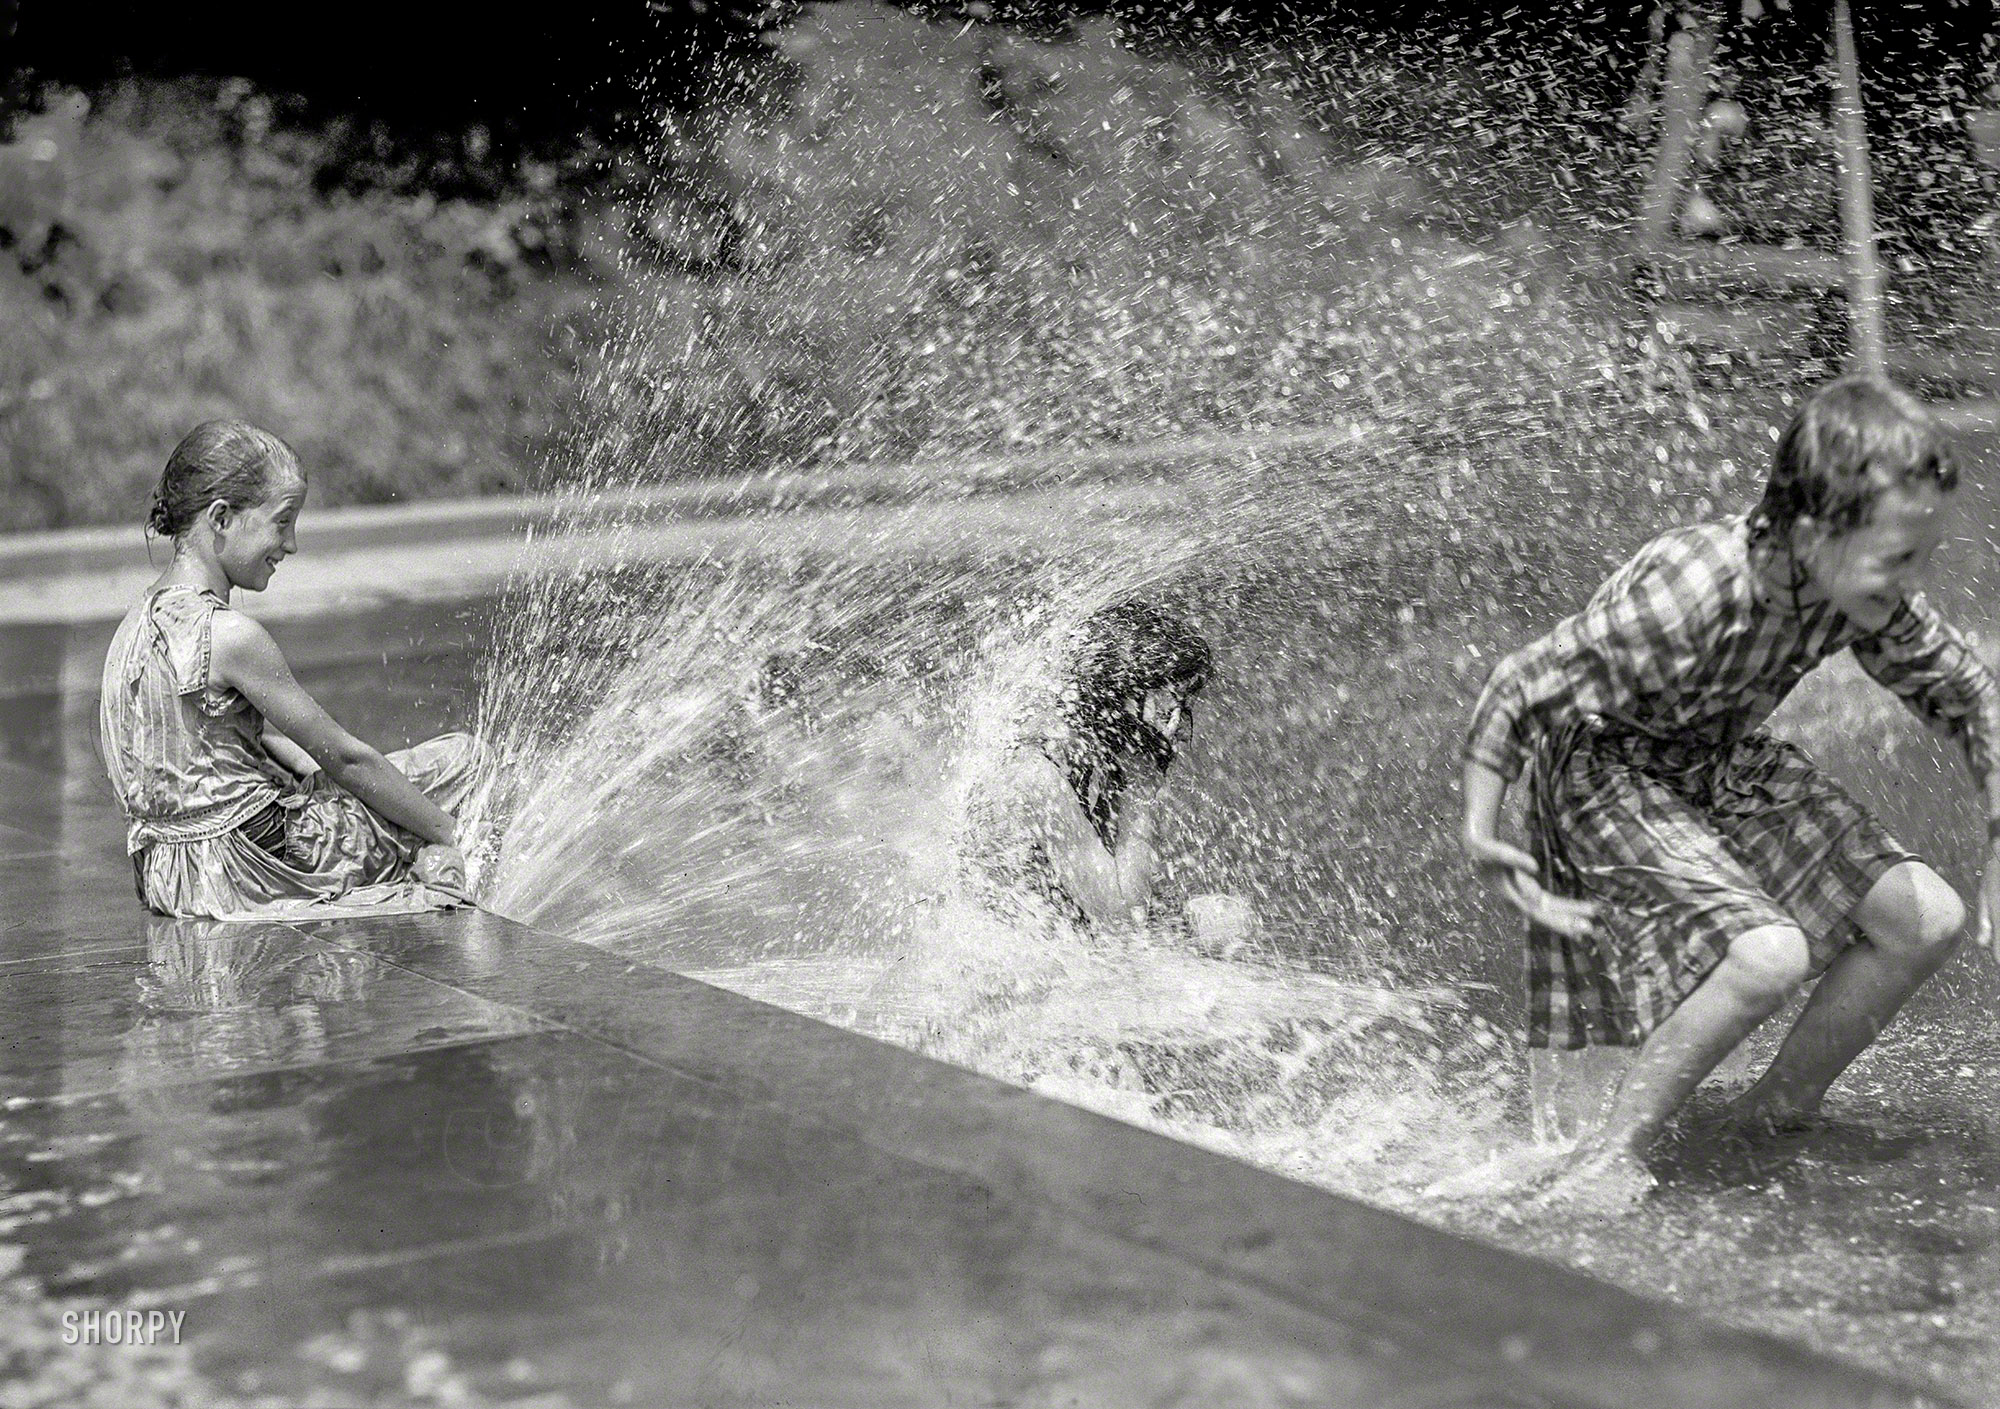 Summer 1912. "District of Columbia parks. Children at fountains and pools." Harris & Ewing Collection glass negative. View full size.